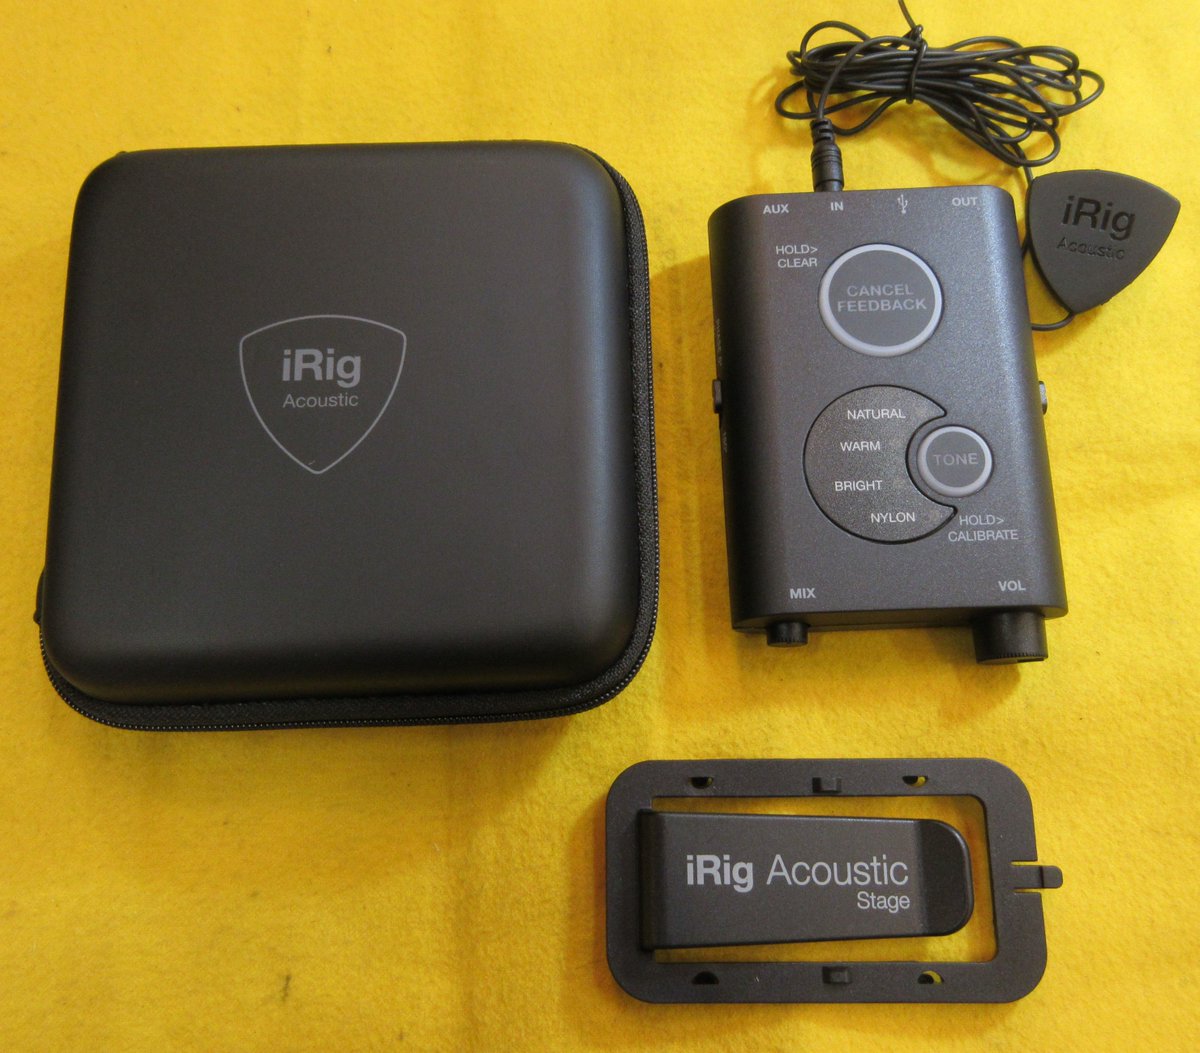 #iRig_Acoustic_Stage hashtag on Twitter